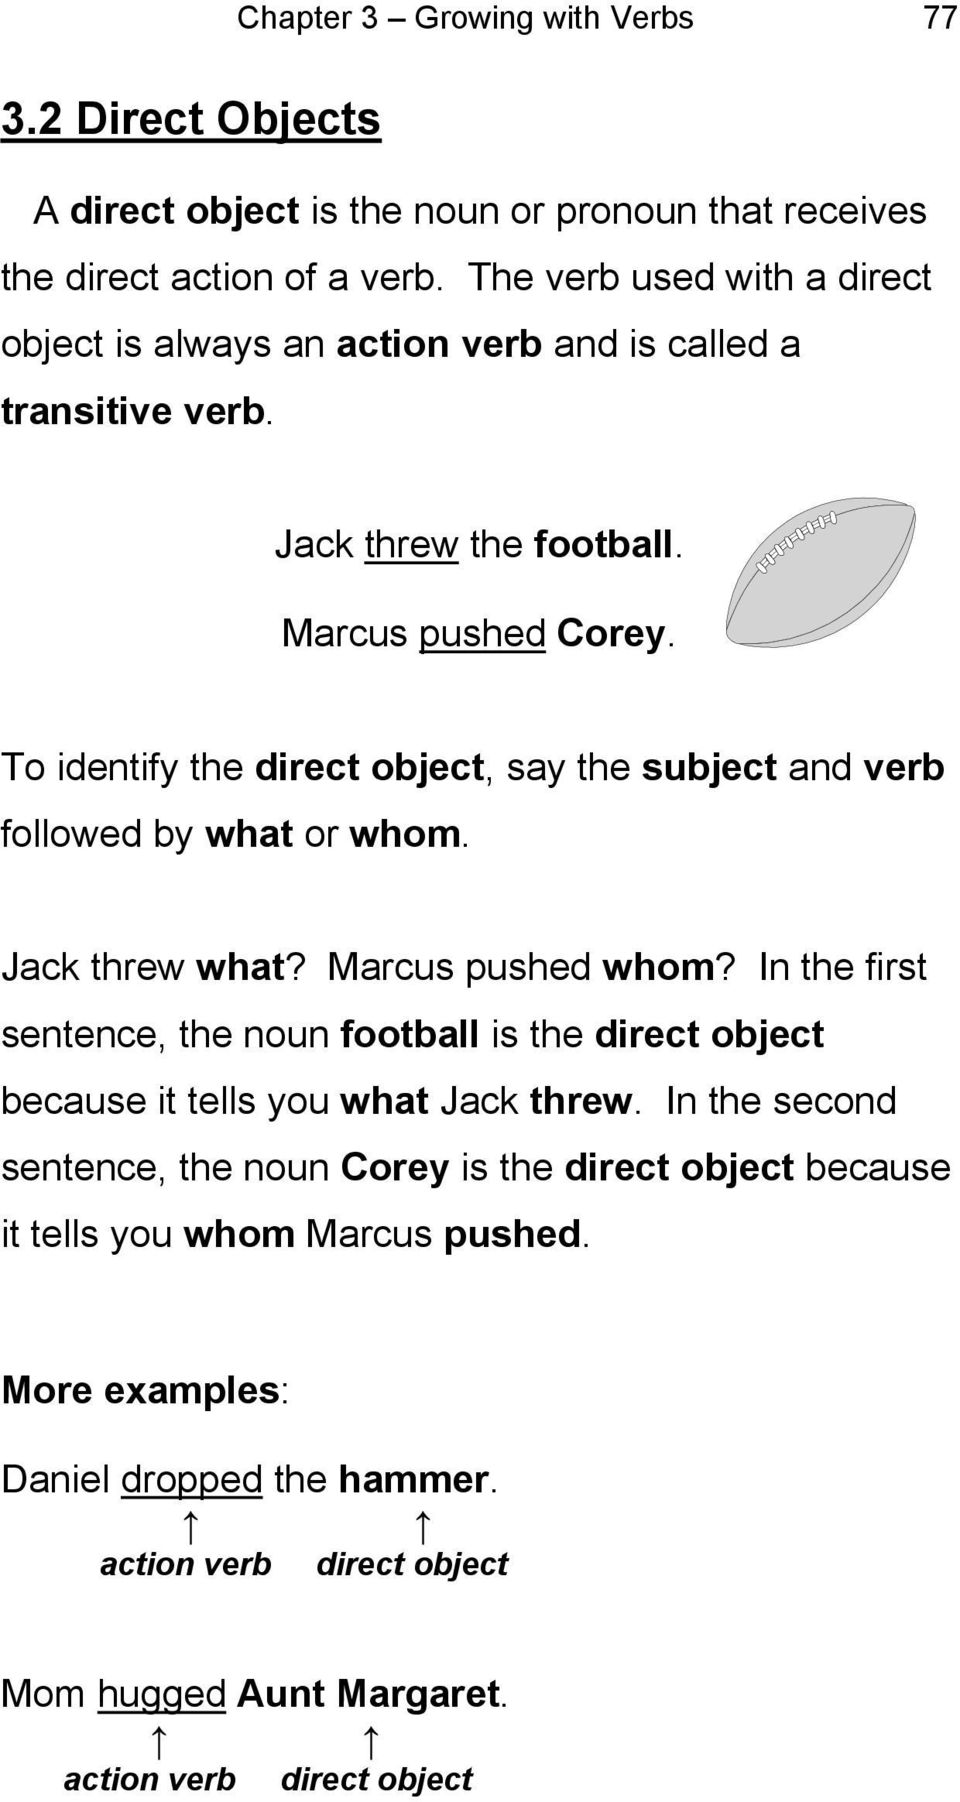 To identify the direct object, say the subject and verb followed by what or whom. Jack threw what? Marcus pushed whom?